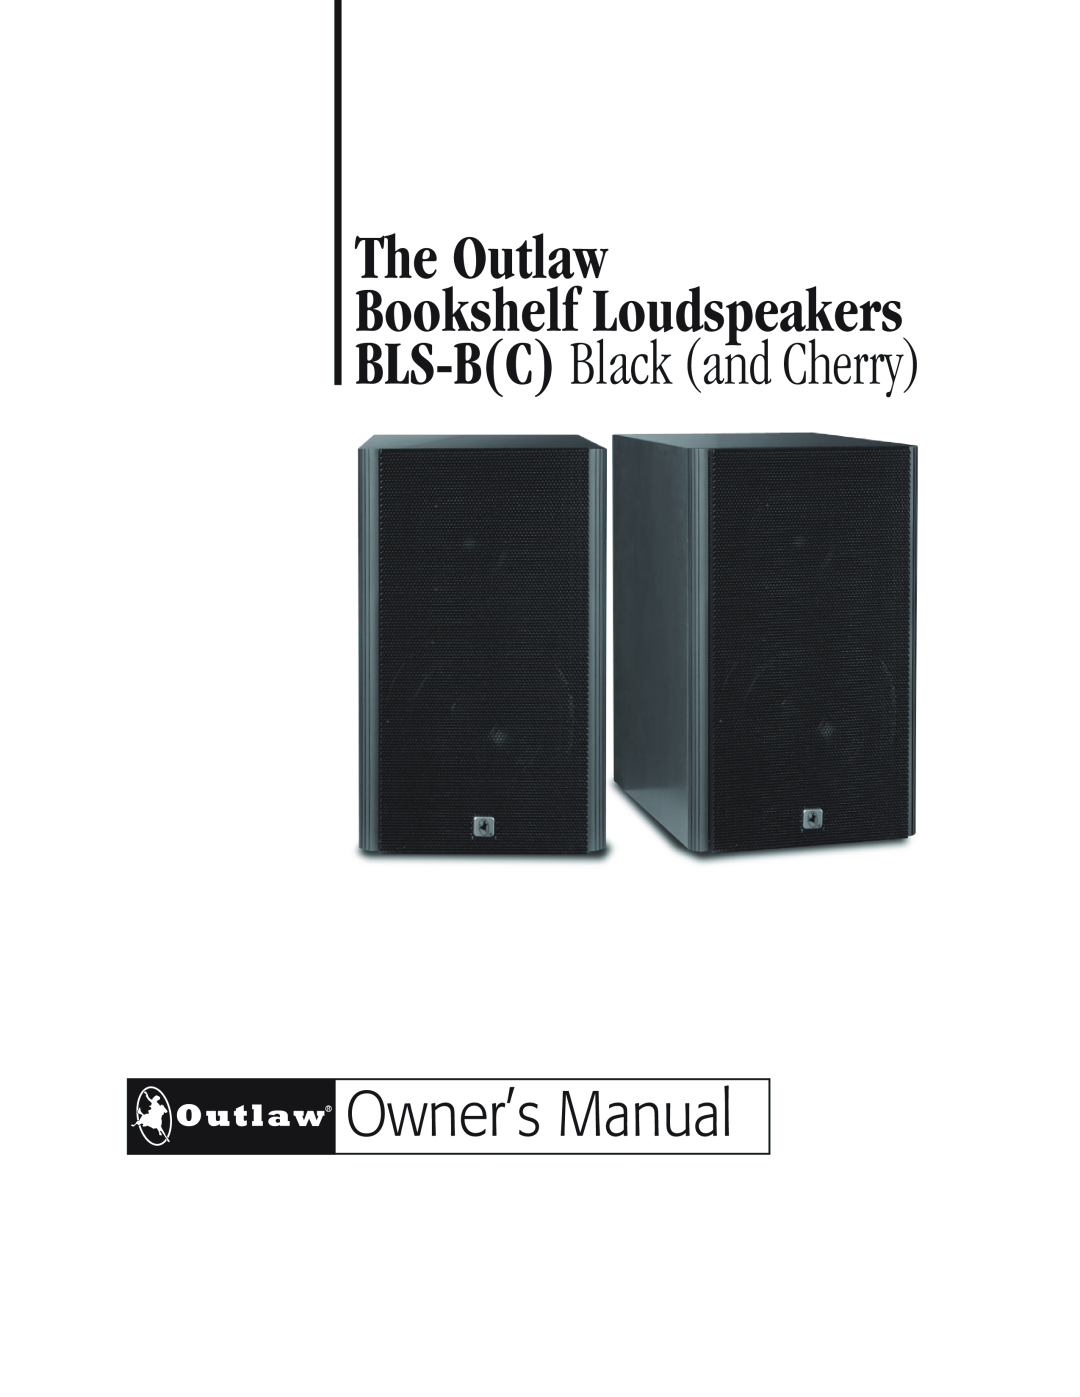 Outlaw Audio BLS-B(C) owner manual The Outlaw Bookshelf Loudspeakers, BLS-BC Black and Cherry 